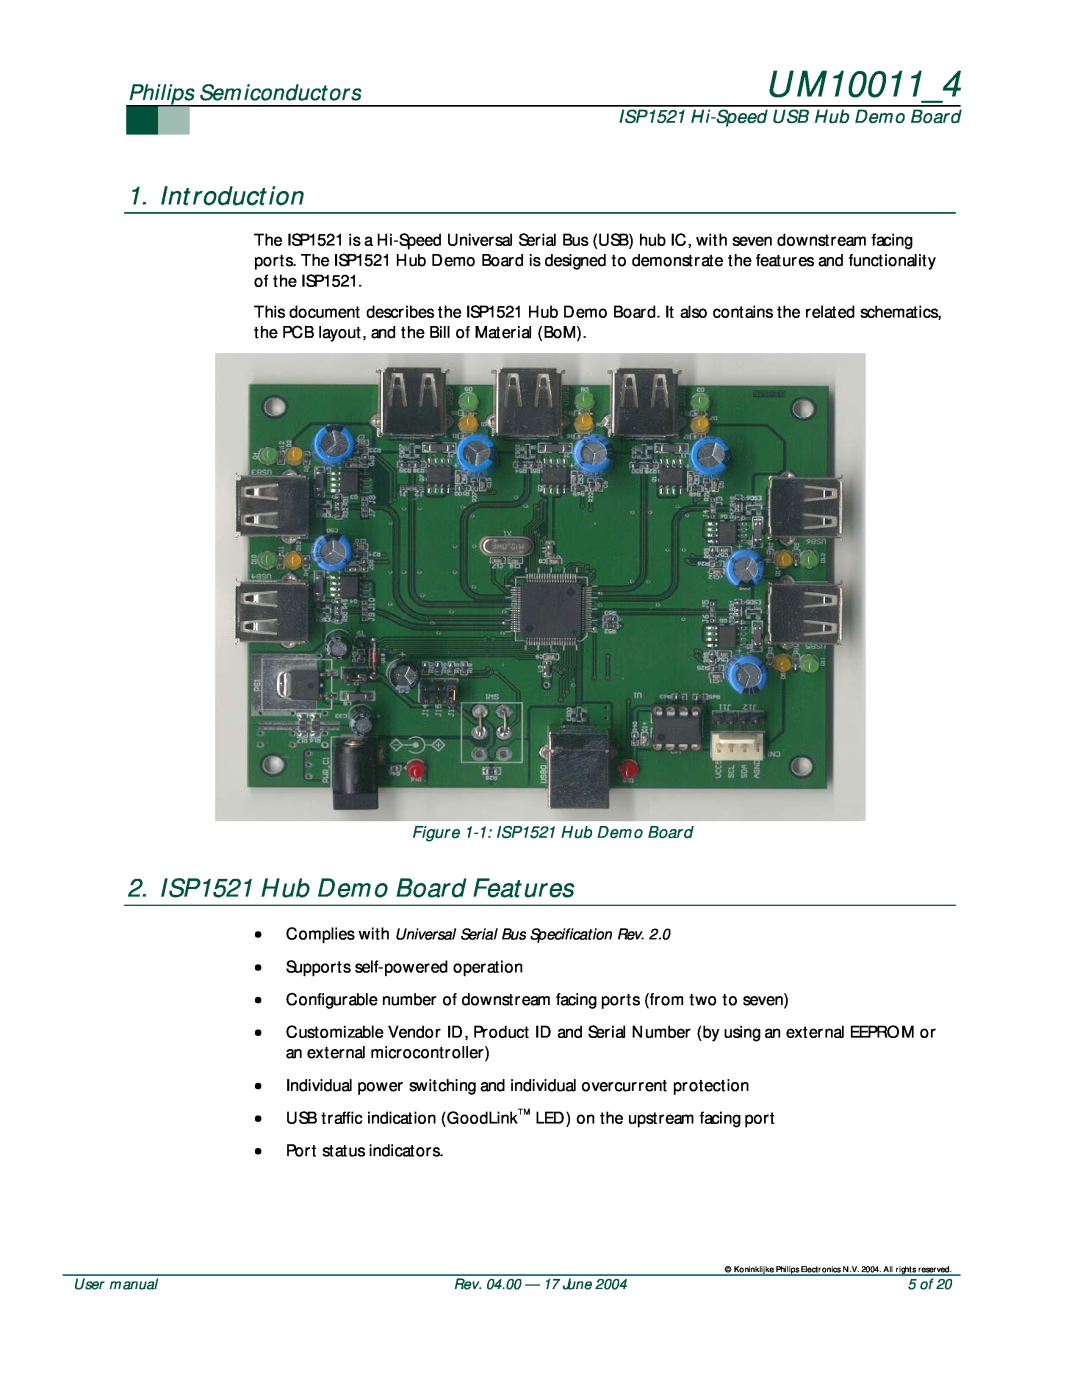 Philips UM10011 user manual Introduction, 2.ISP1521 Hub Demo Board Features, Philips Semiconductors 